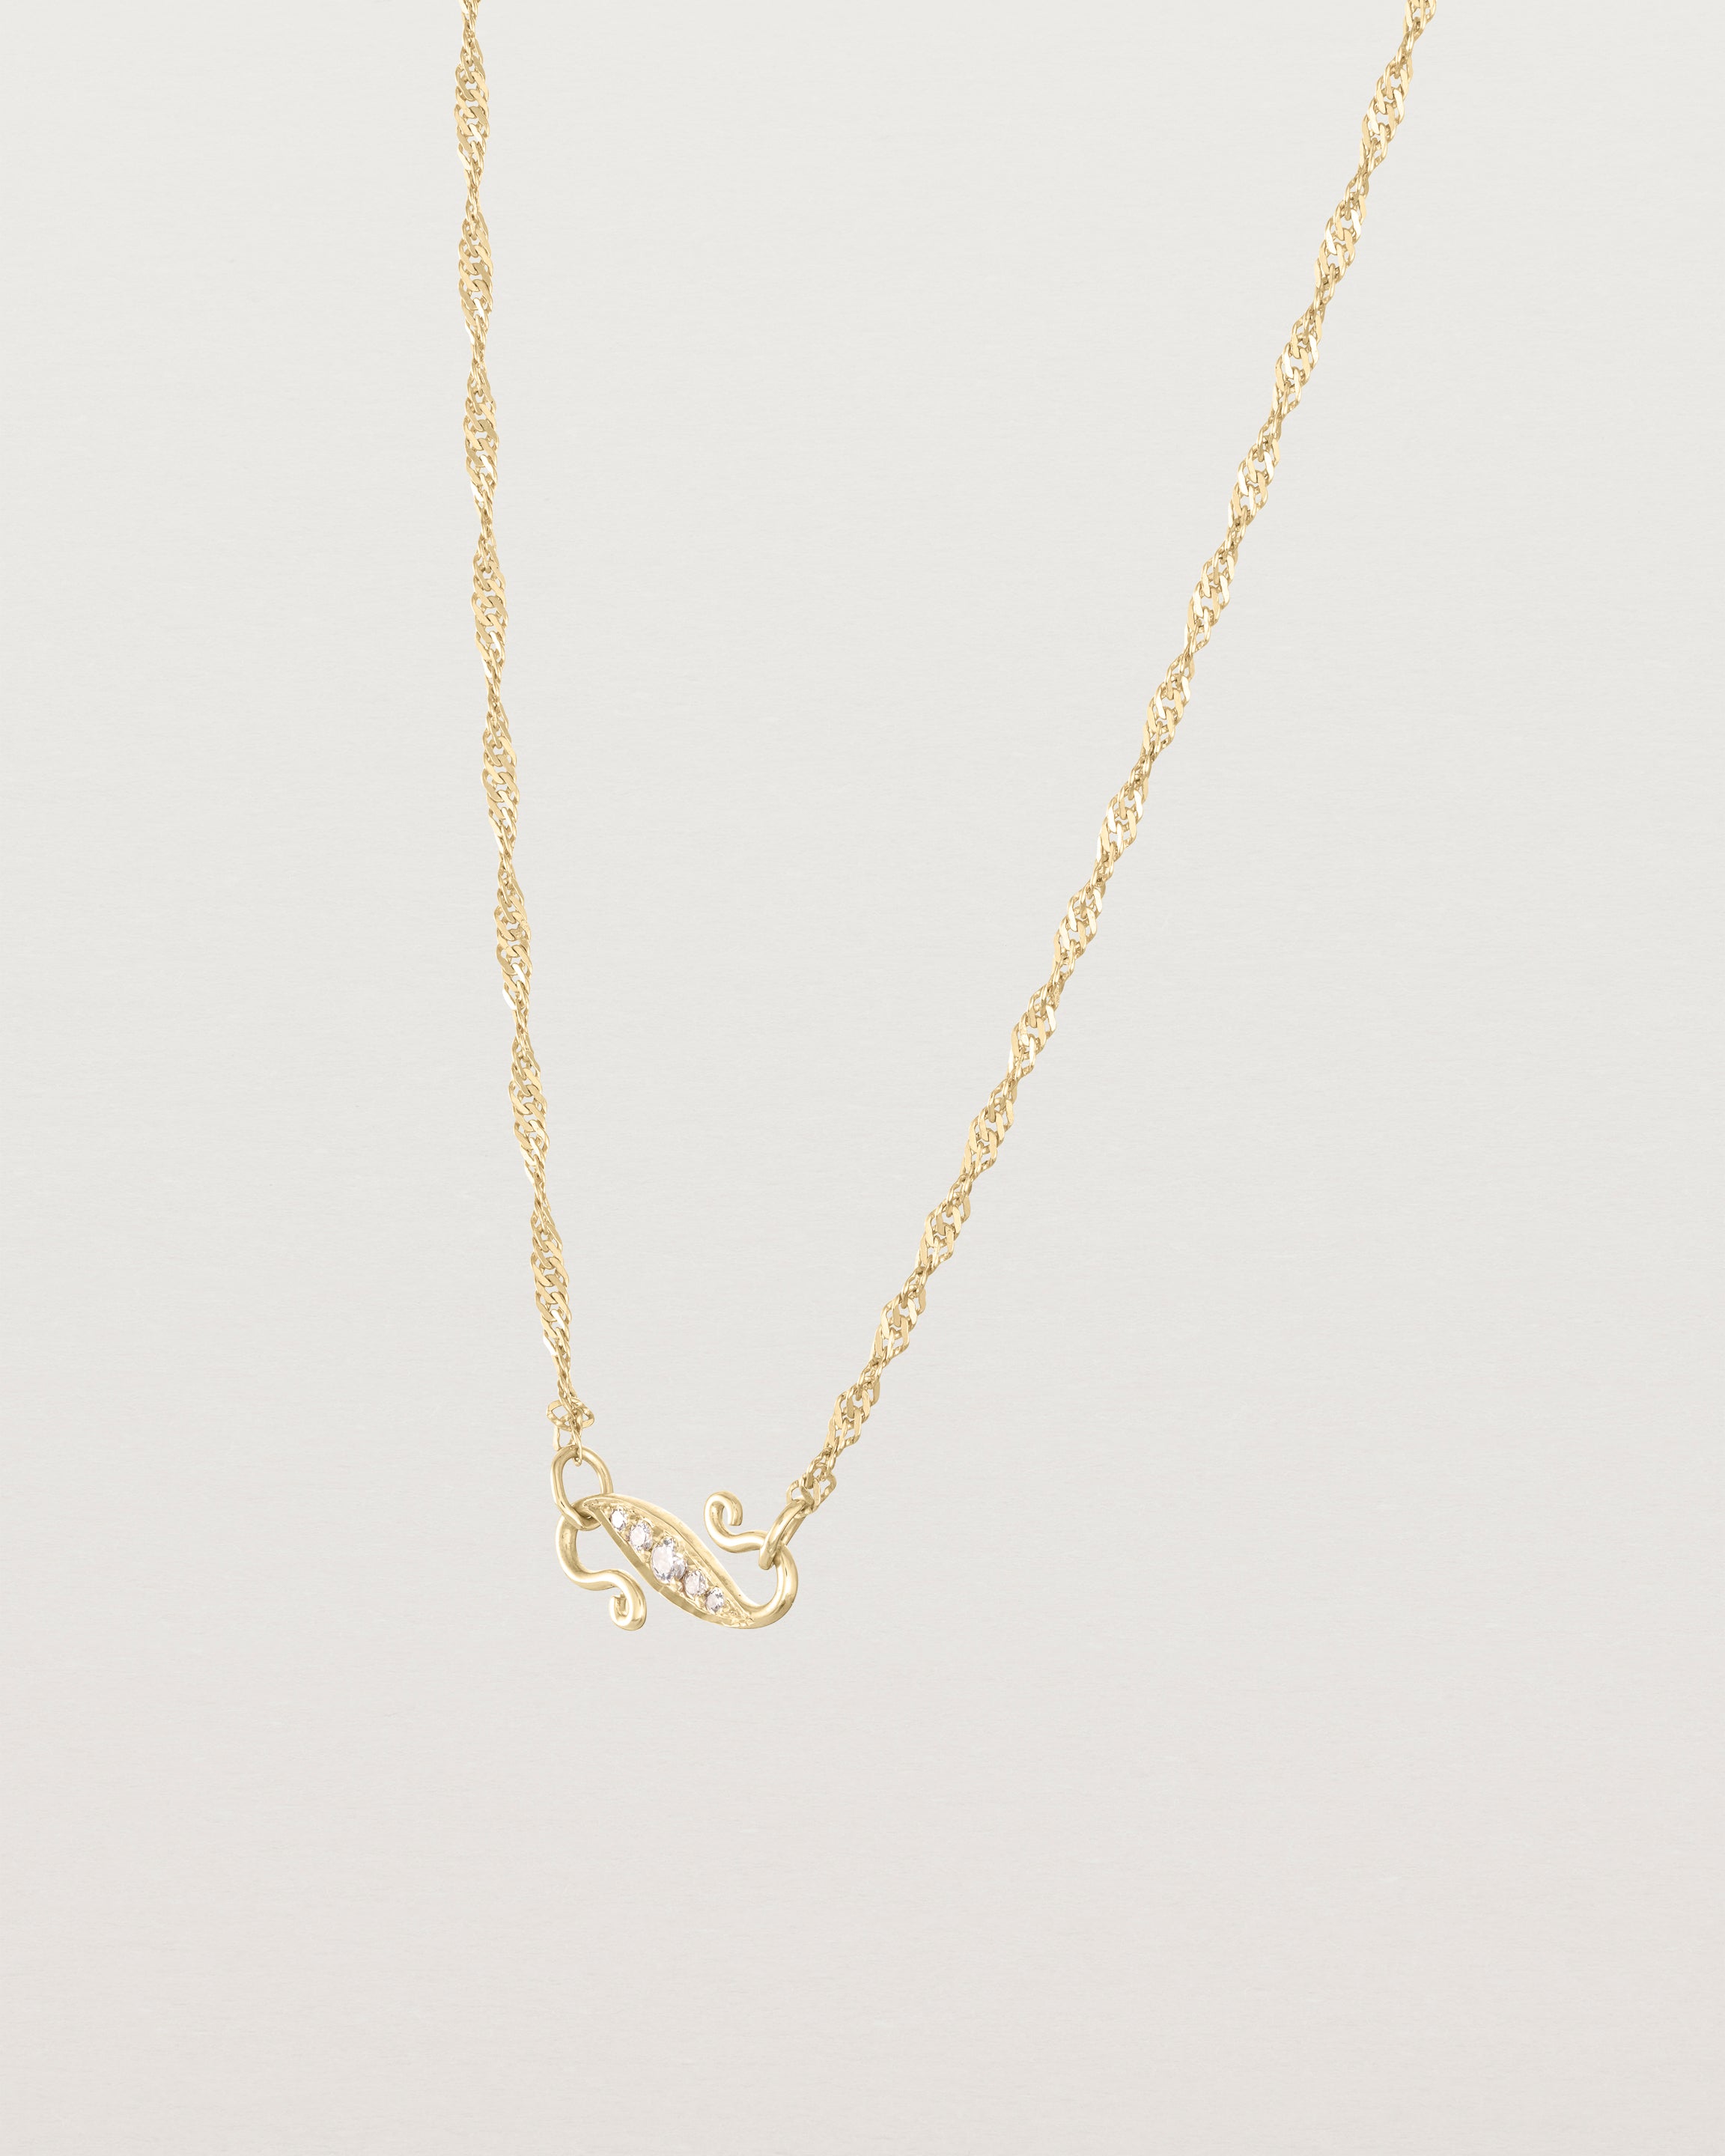 Lucille Chain Necklace | Vintage Inspired